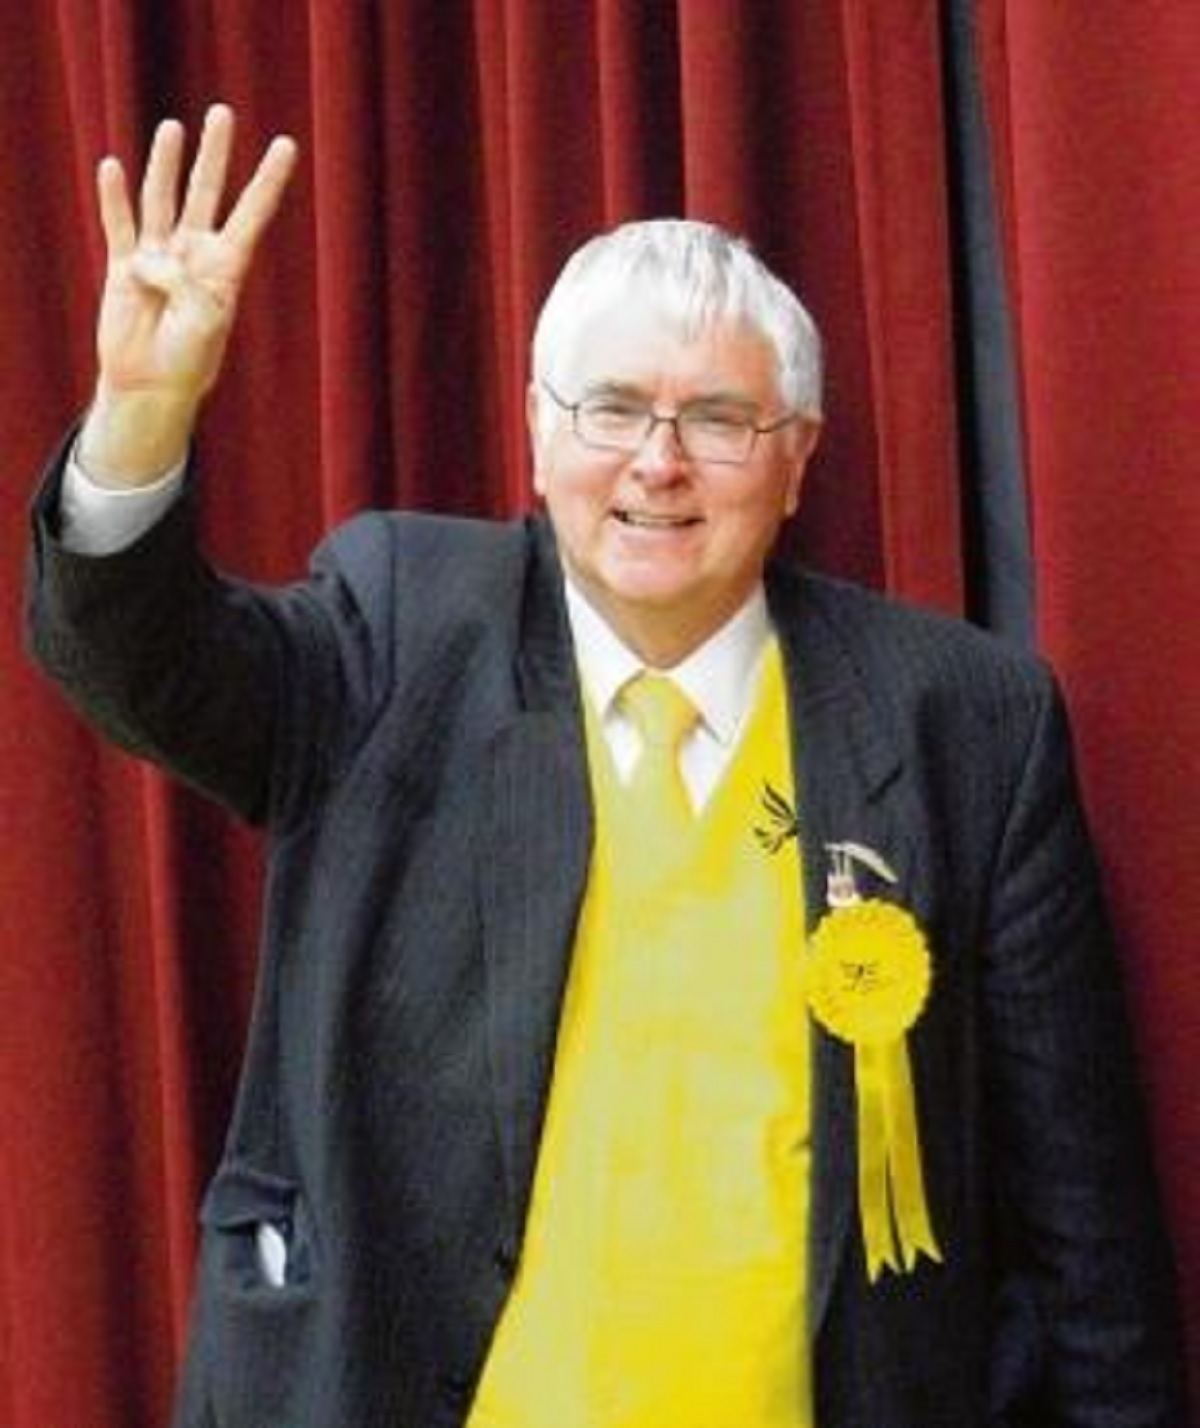 After 40 years as a councillor, Mayor and MP in Colchester, Bob Russell has been recognised for his public service by being awarded a Knighthood in the New Years honours list.The veteran Lib Dem politician, 65, said the honour was a team effort and would